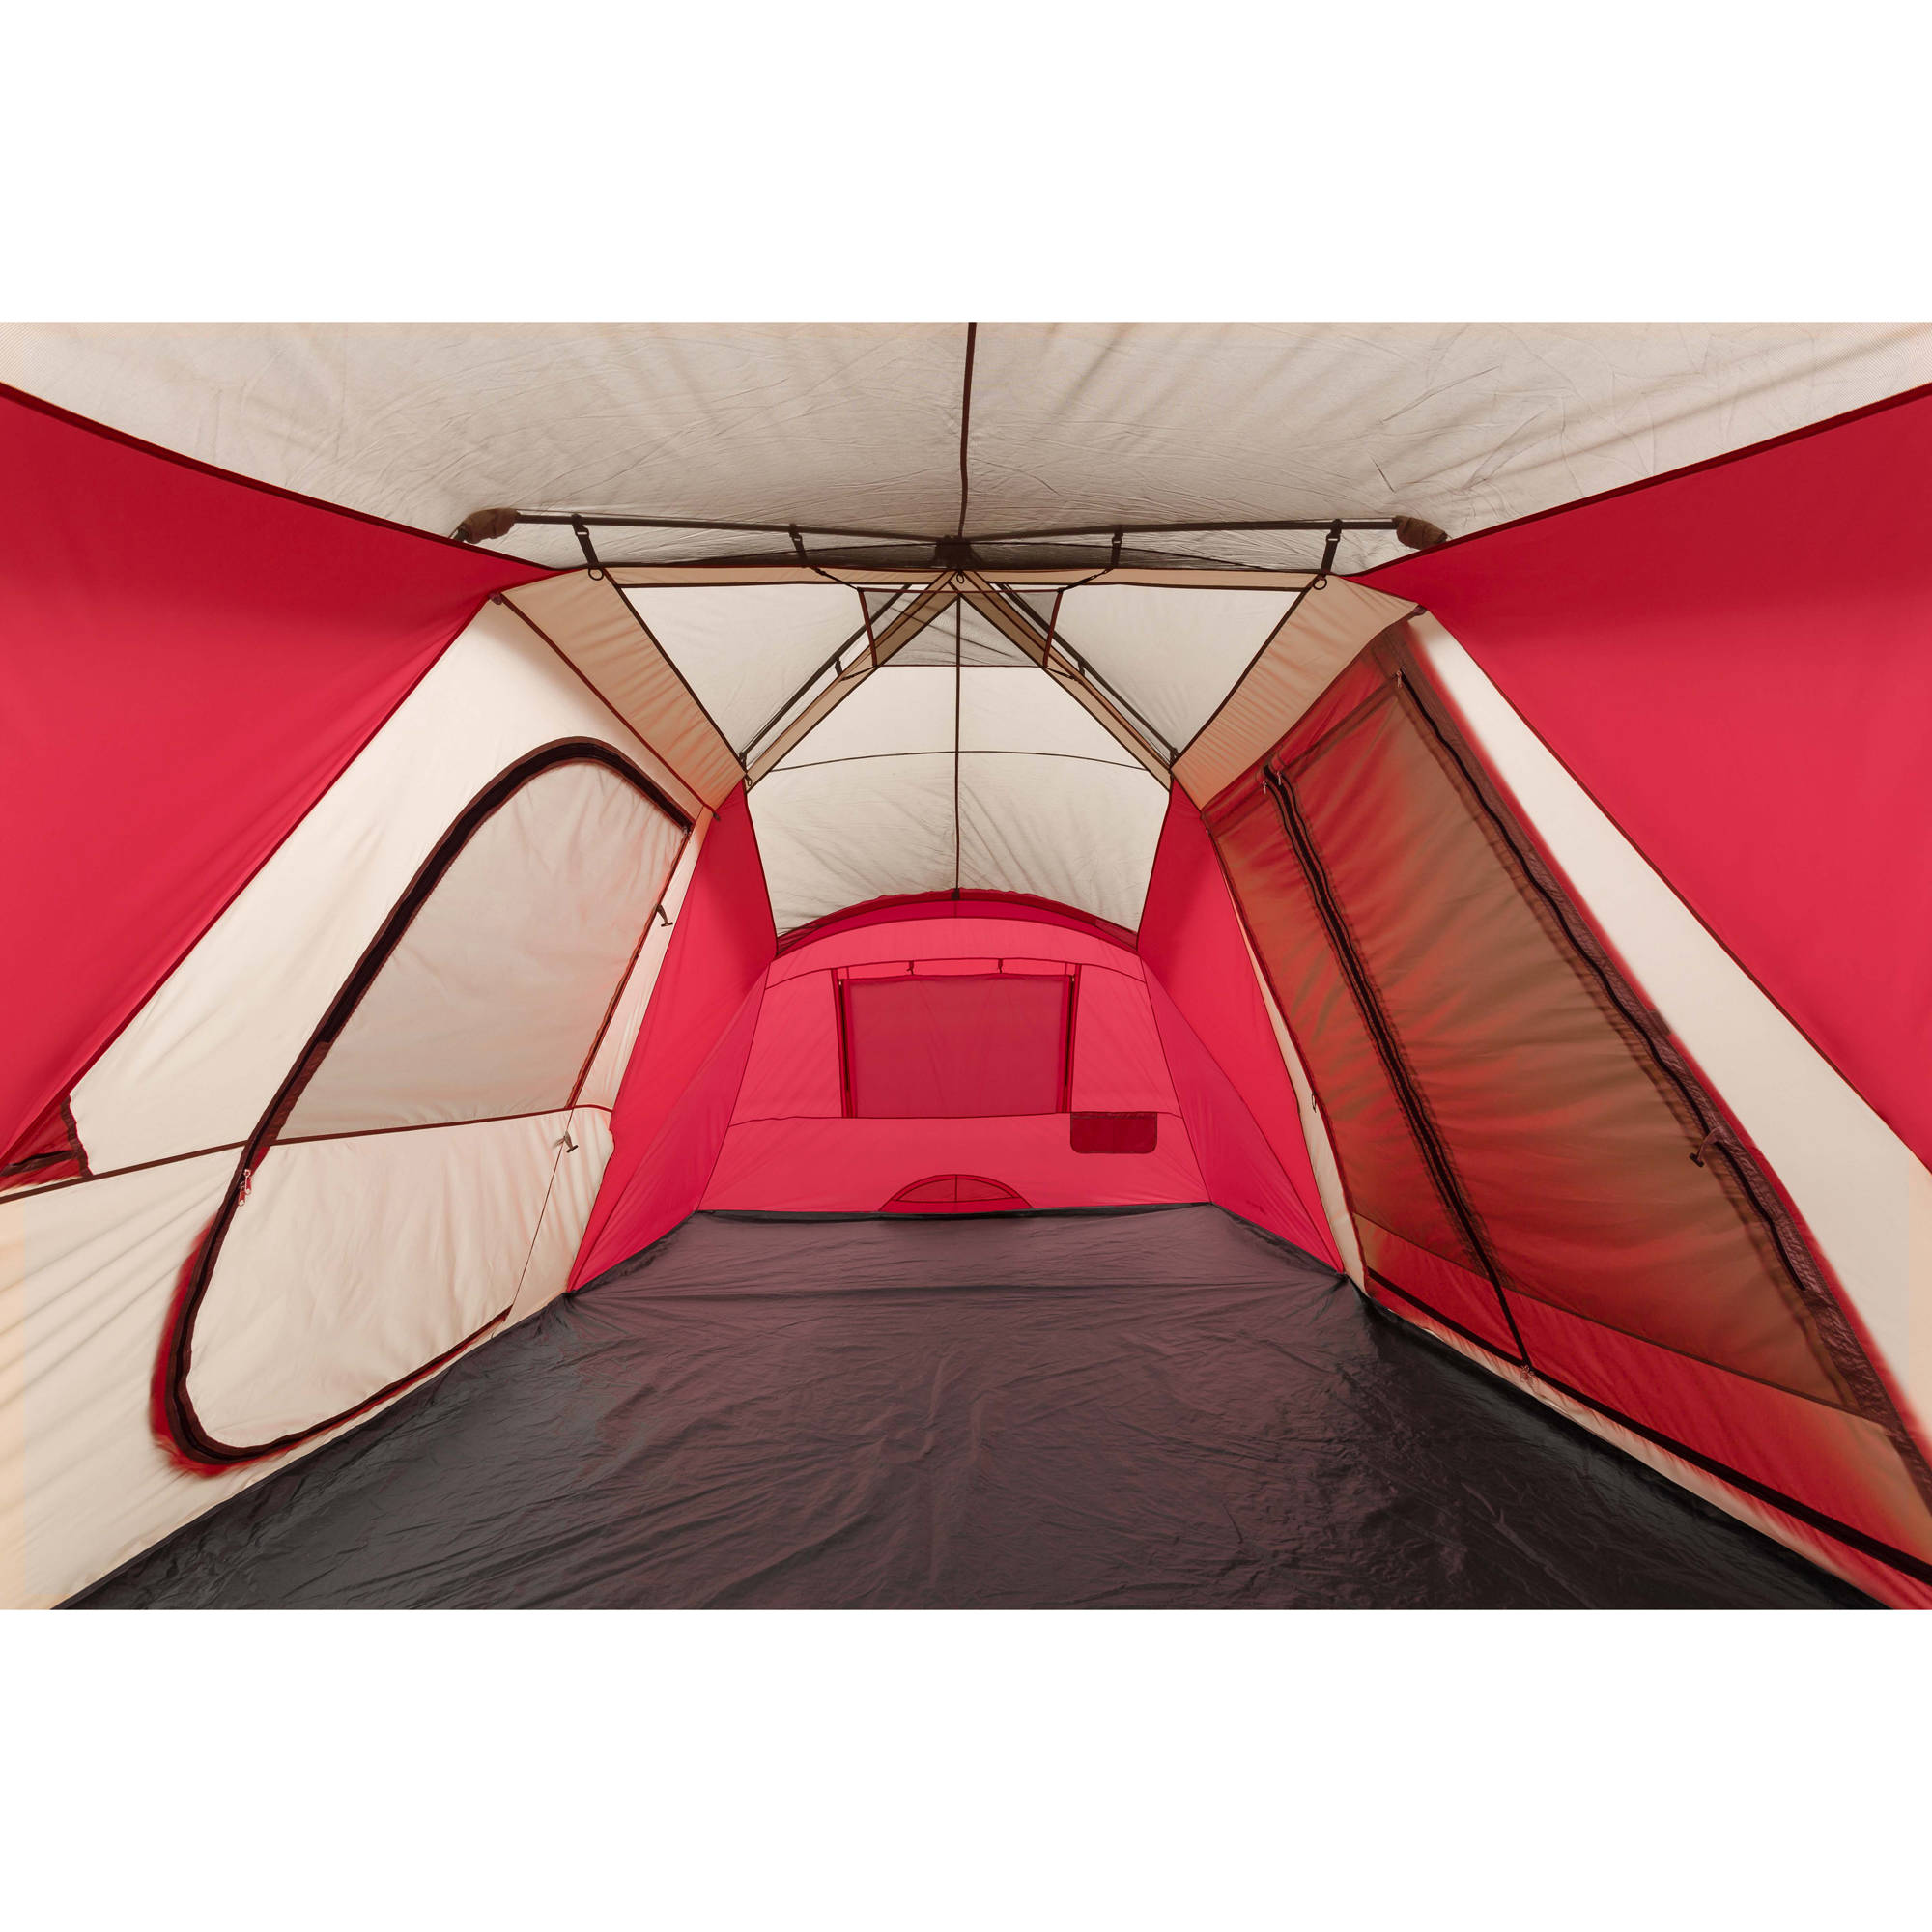 Ozark Trail 21' x 10' 3-Room Instant Tent with Awning, Sleeps 12, Red - image 4 of 11